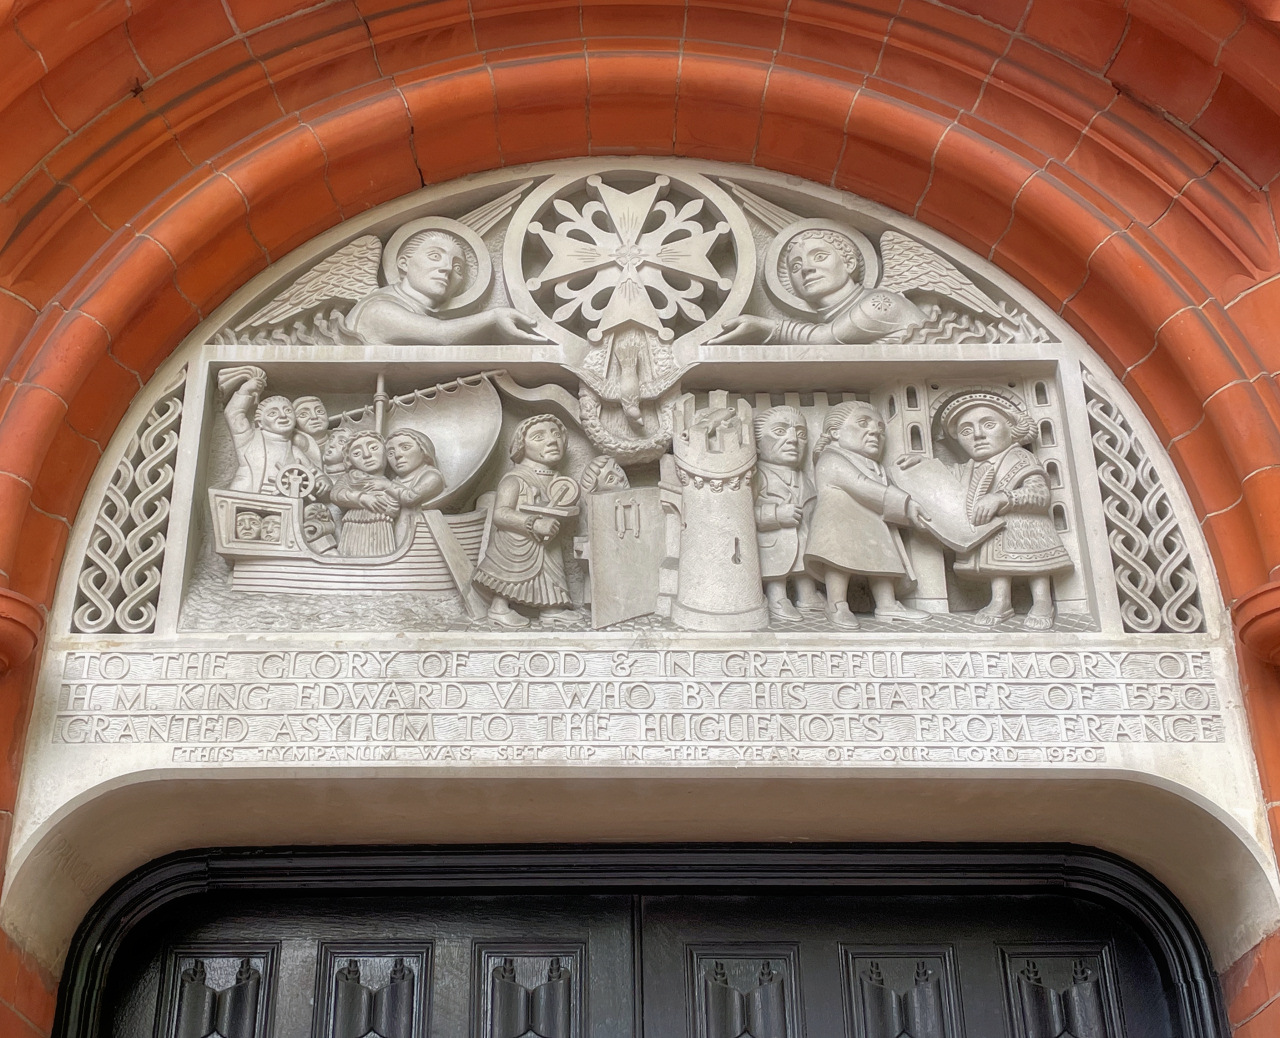 Decorative tympanum at the French Protestant Church, Soho Square, with an inscription reading: To the glory of God & in grateful memory of HM King Edward VI who by his charter of 1550 granted asylum to the Huguenots from France.